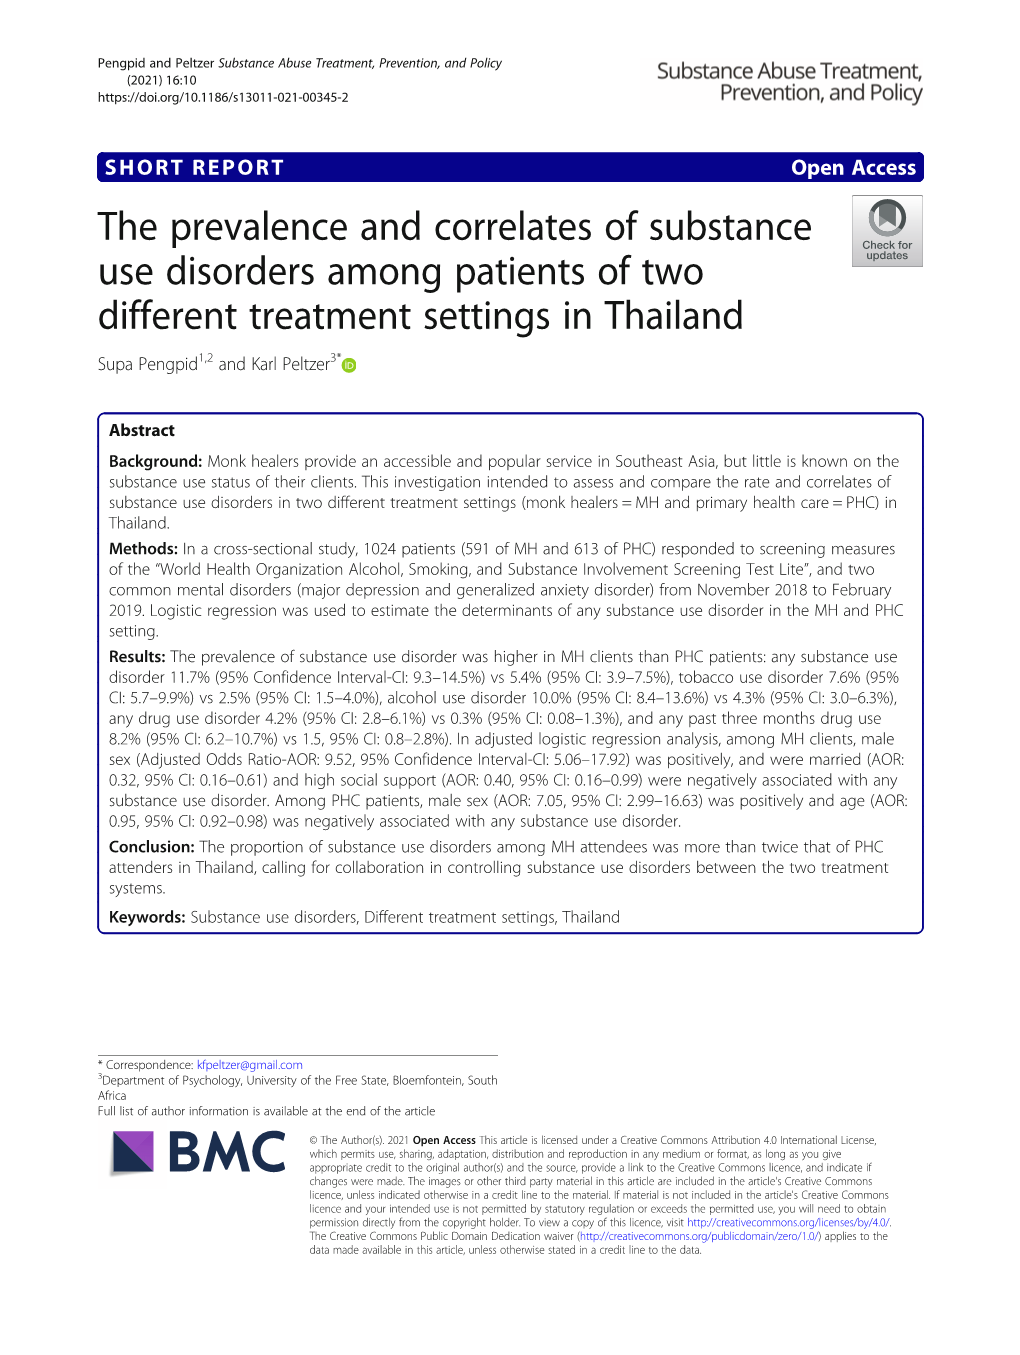 The Prevalence and Correlates of Substance Use Disorders Among Patients of Two Different Treatment Settings in Thailand Supa Pengpid1,2 and Karl Peltzer3*